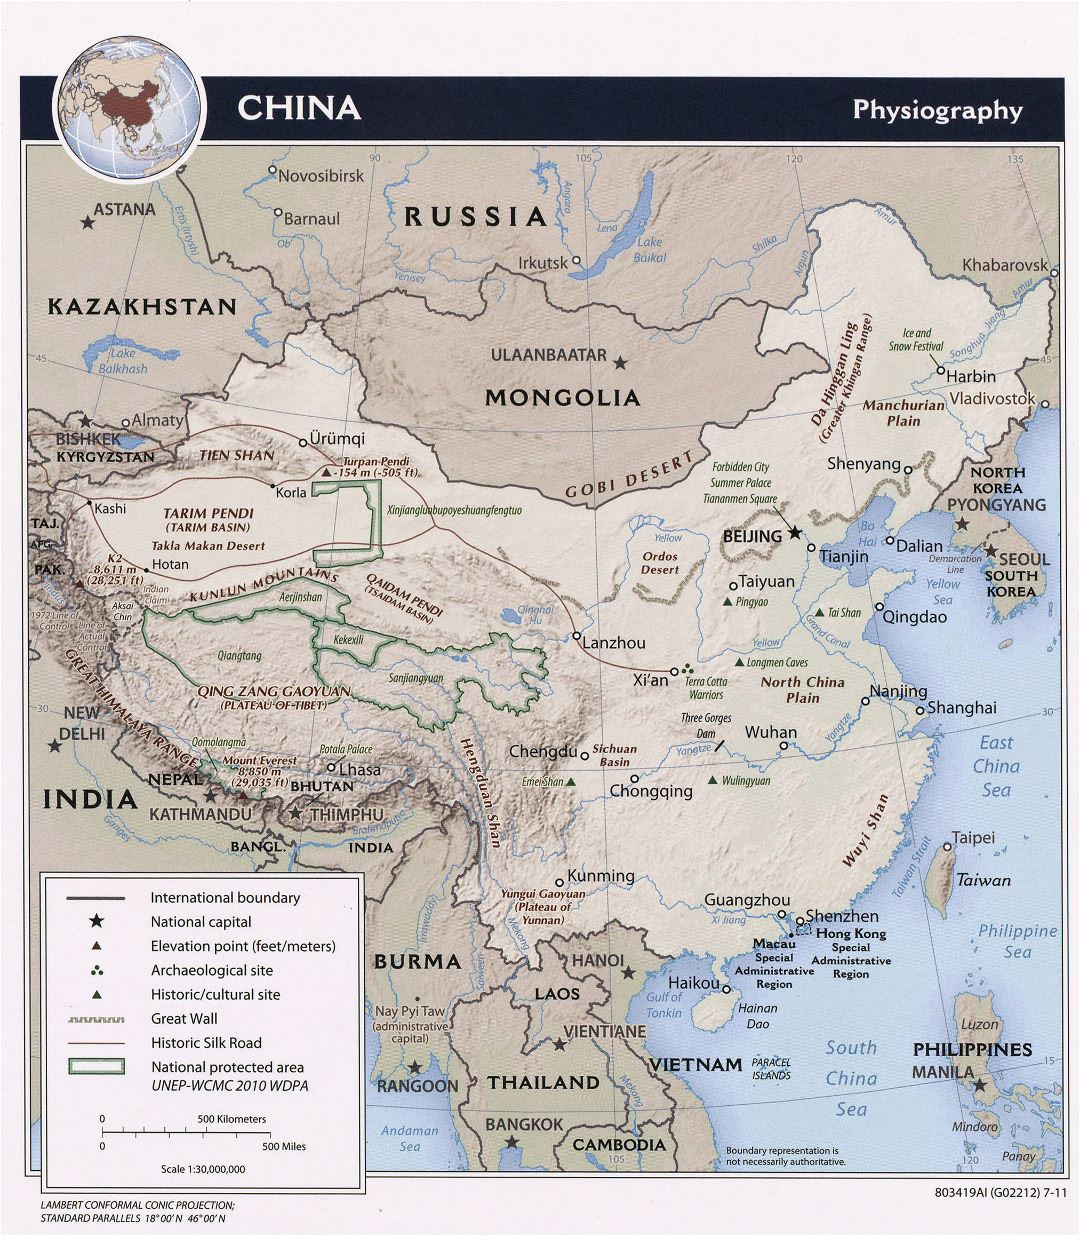 Large detailed physiography map of China - 2011